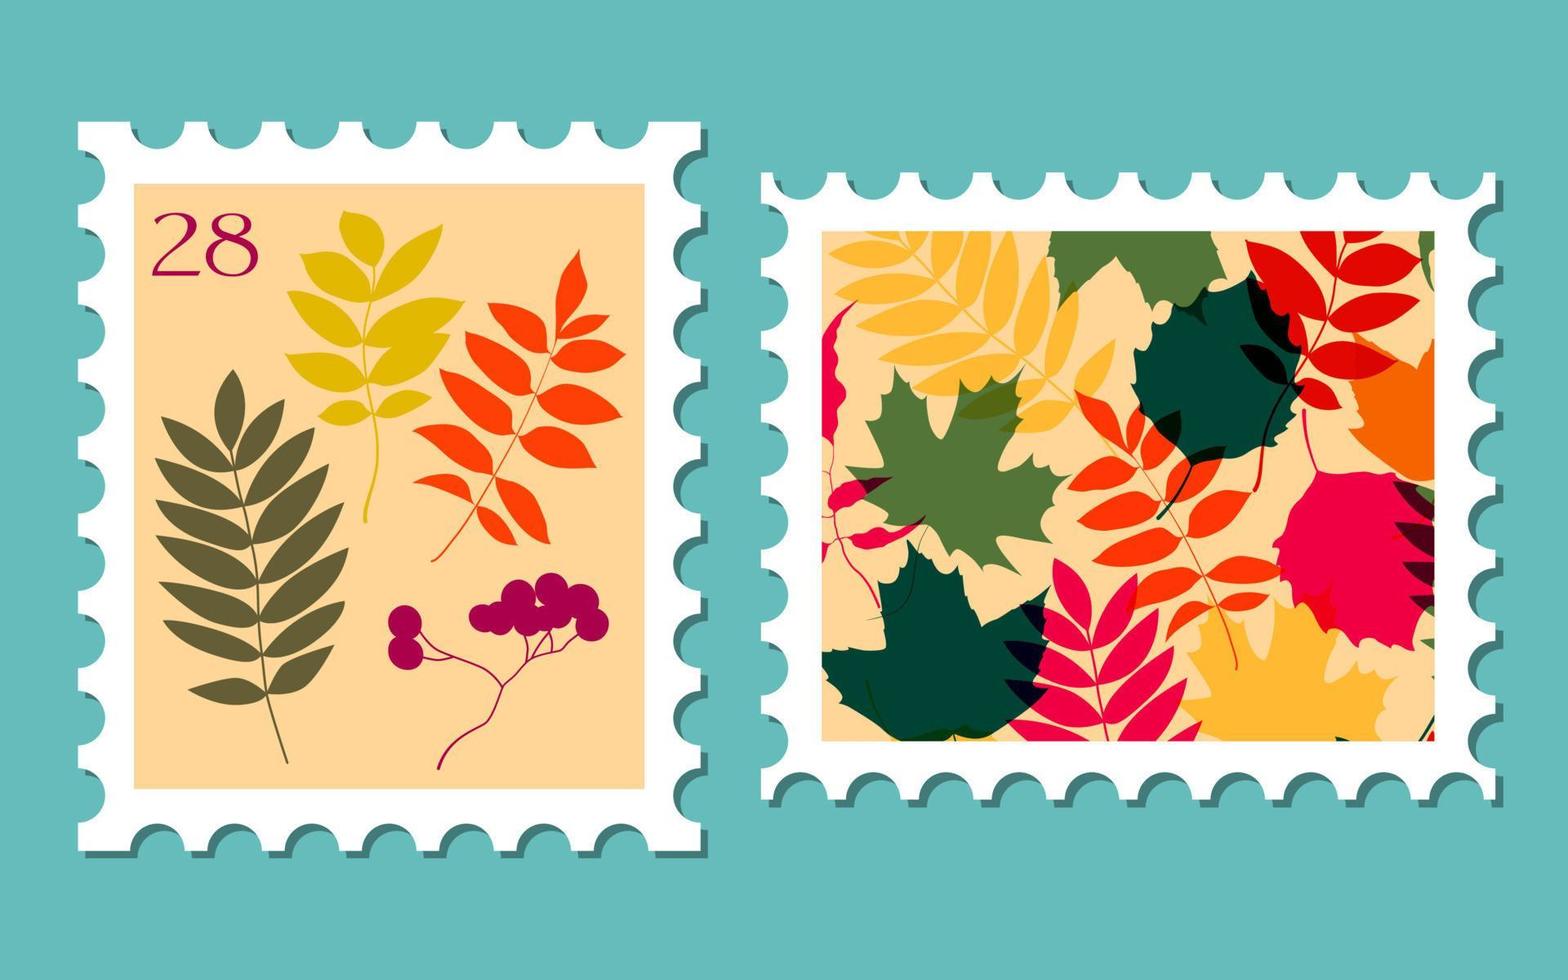 Illustrated Stamps